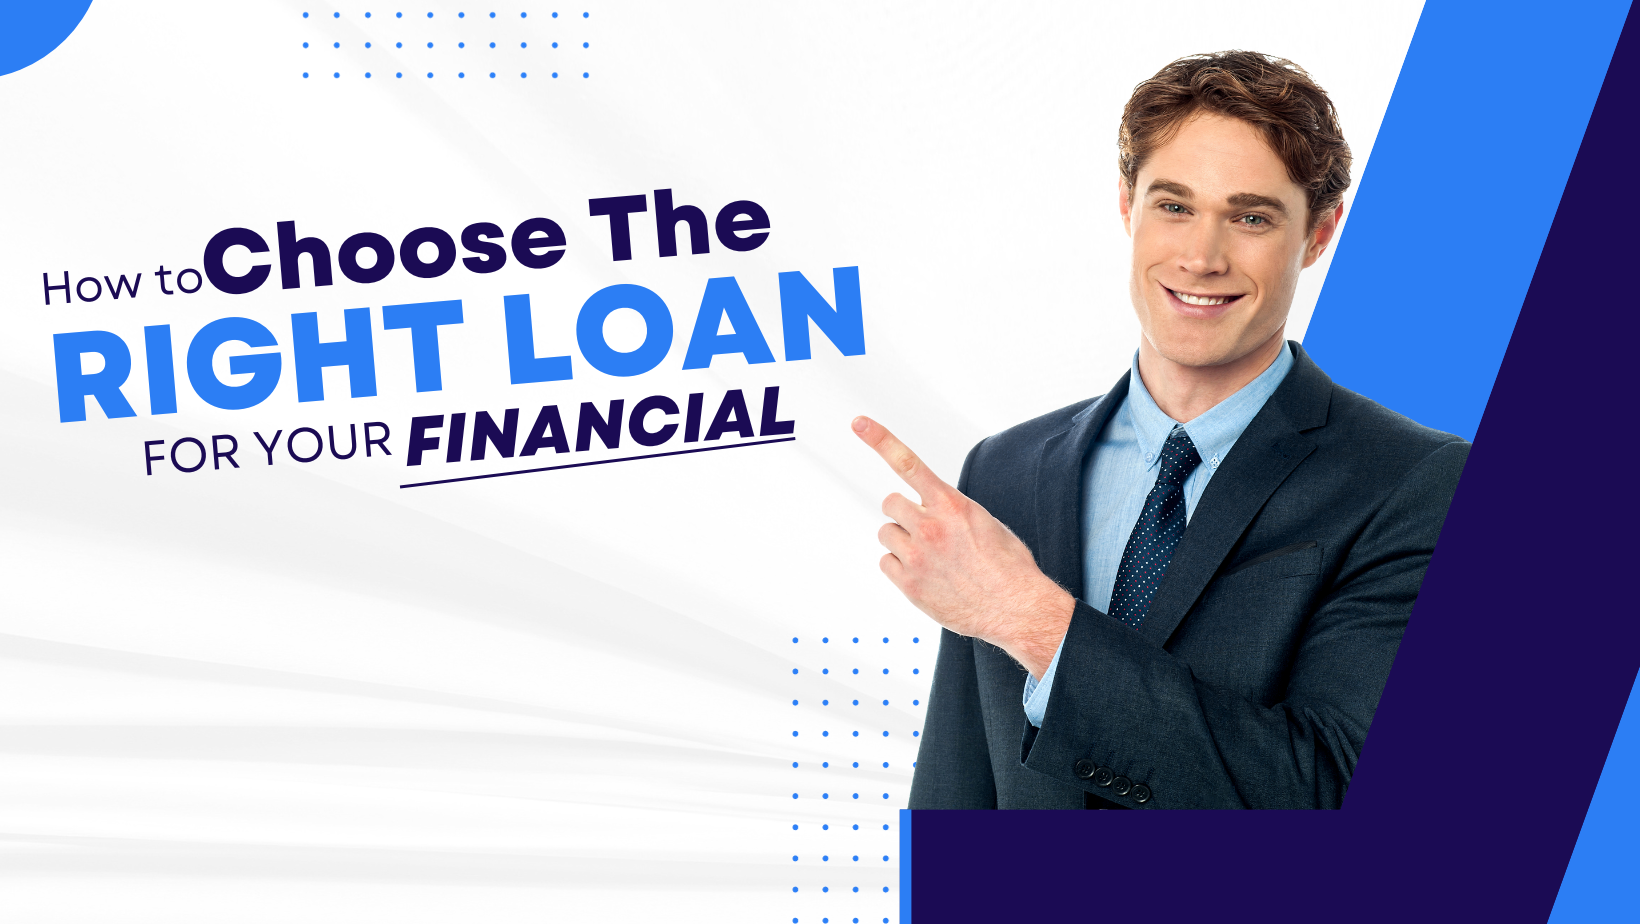 Smart Borrowing: How to Choose the Right Loan for Your Financial